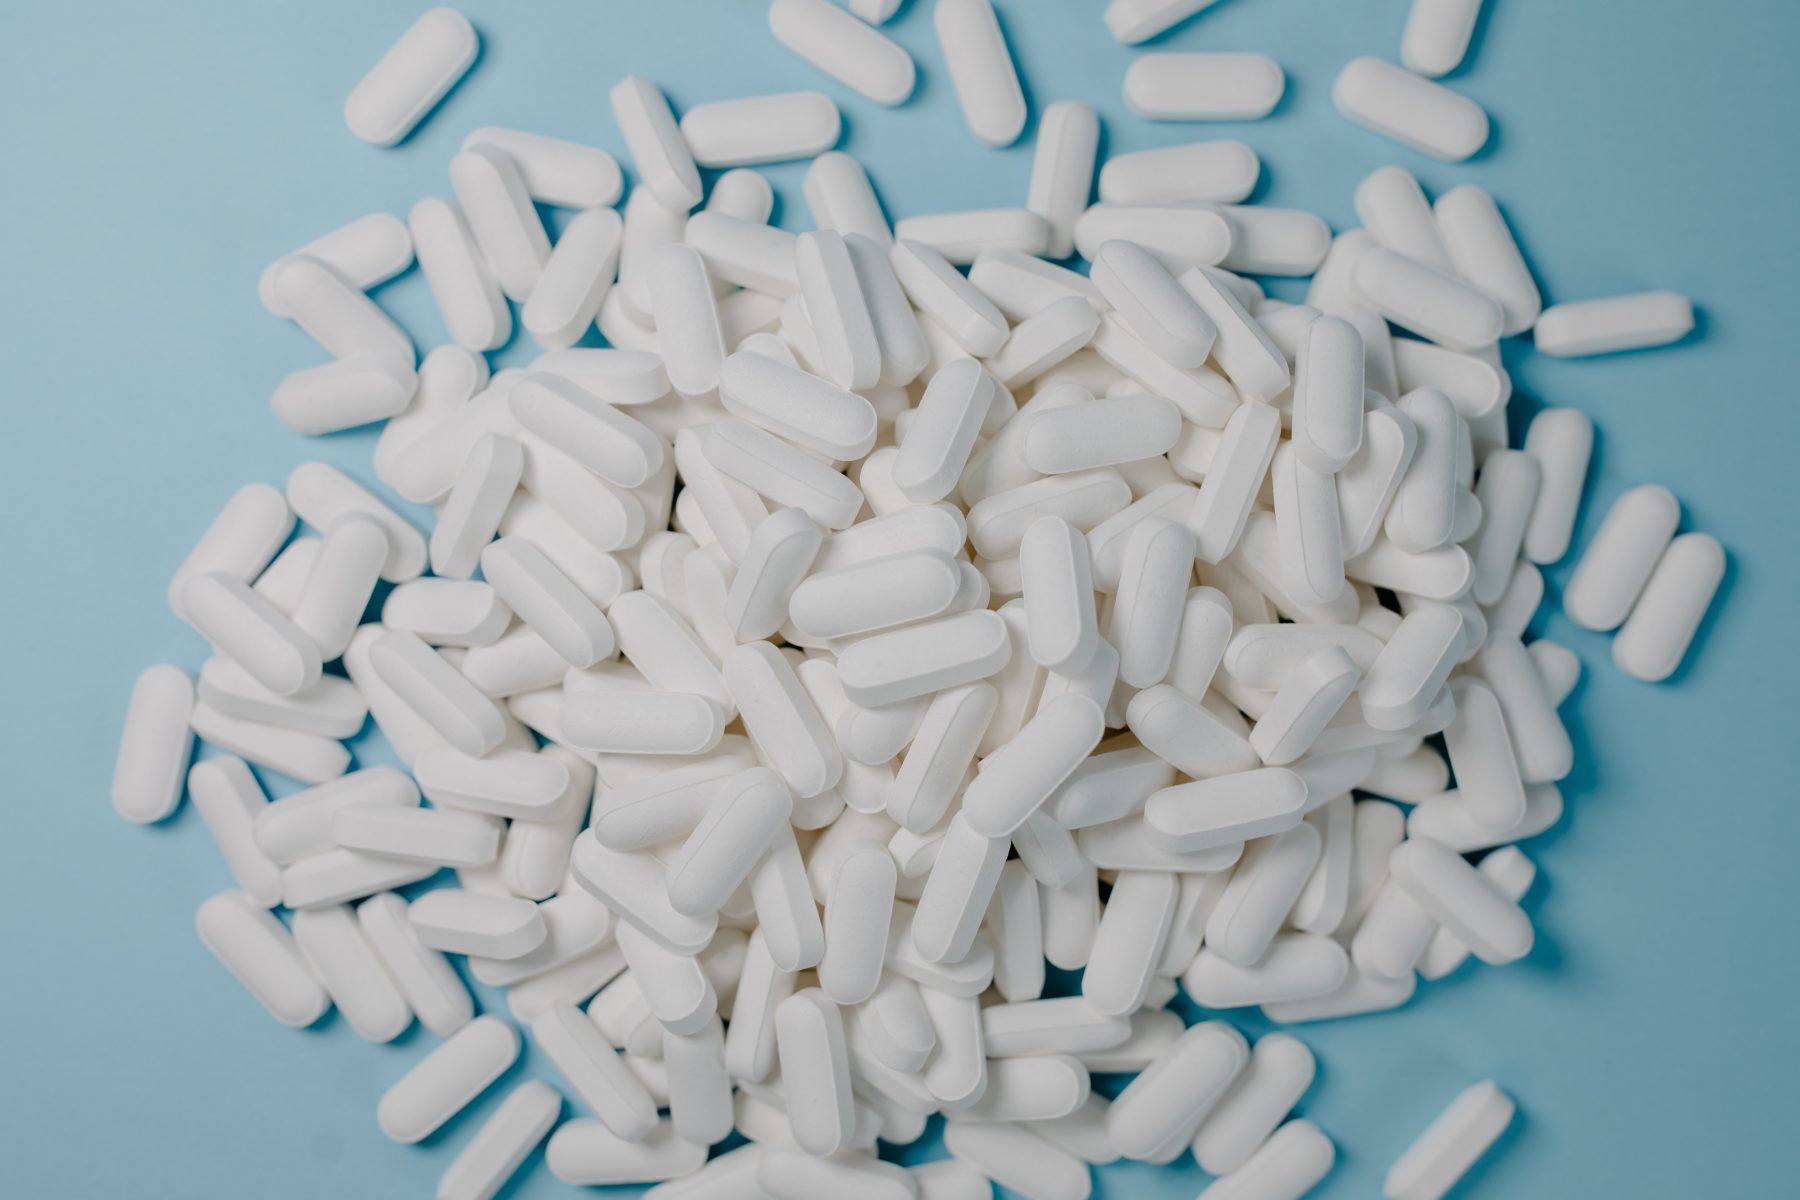 A pile of white pills.